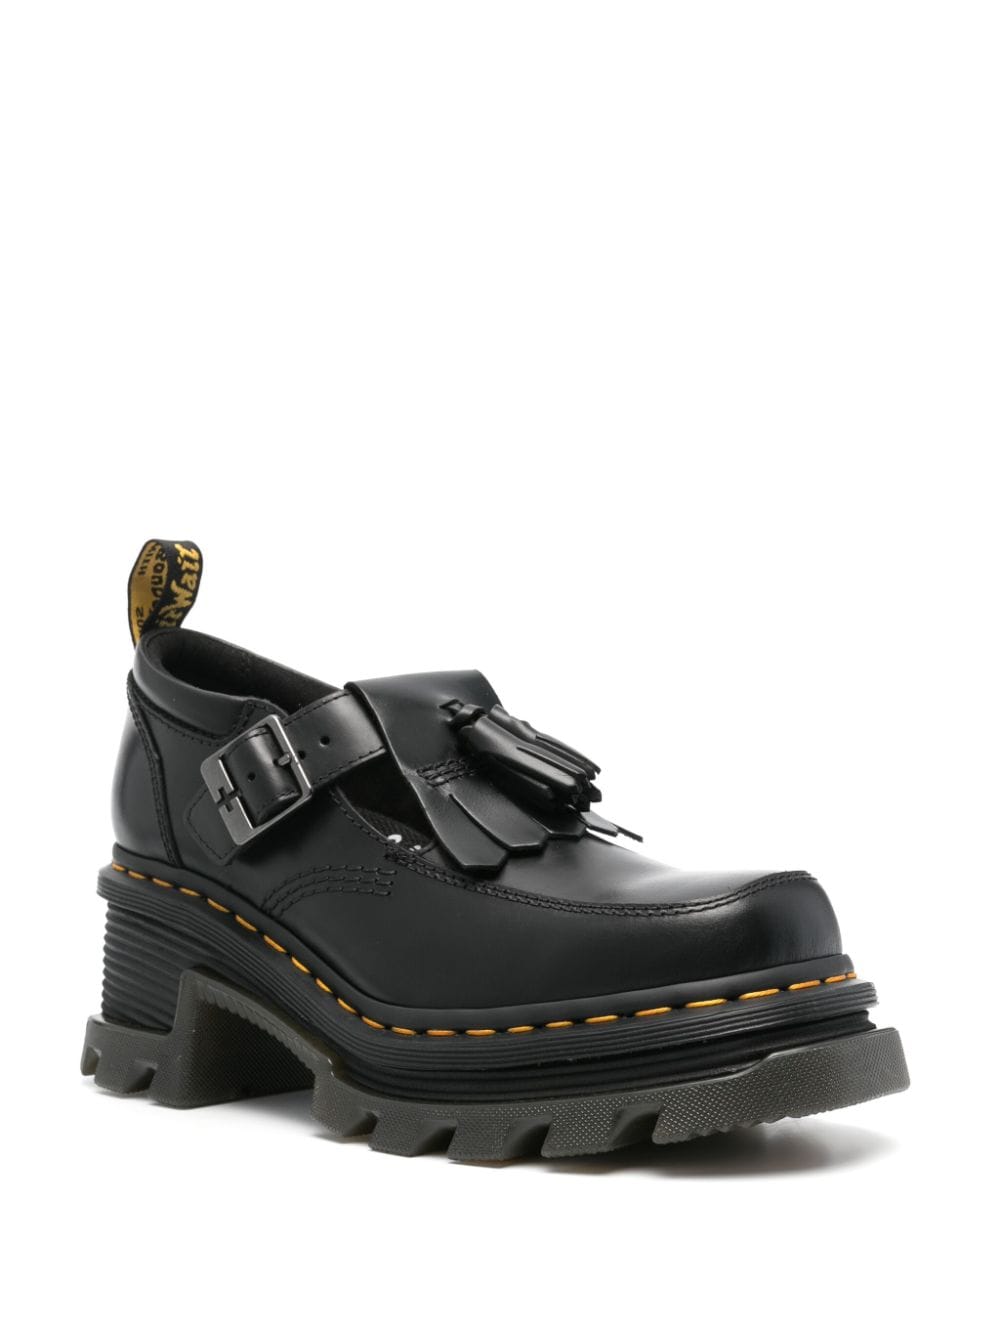 Image 2 of Dr. Martens Corran 70mm leather brogues